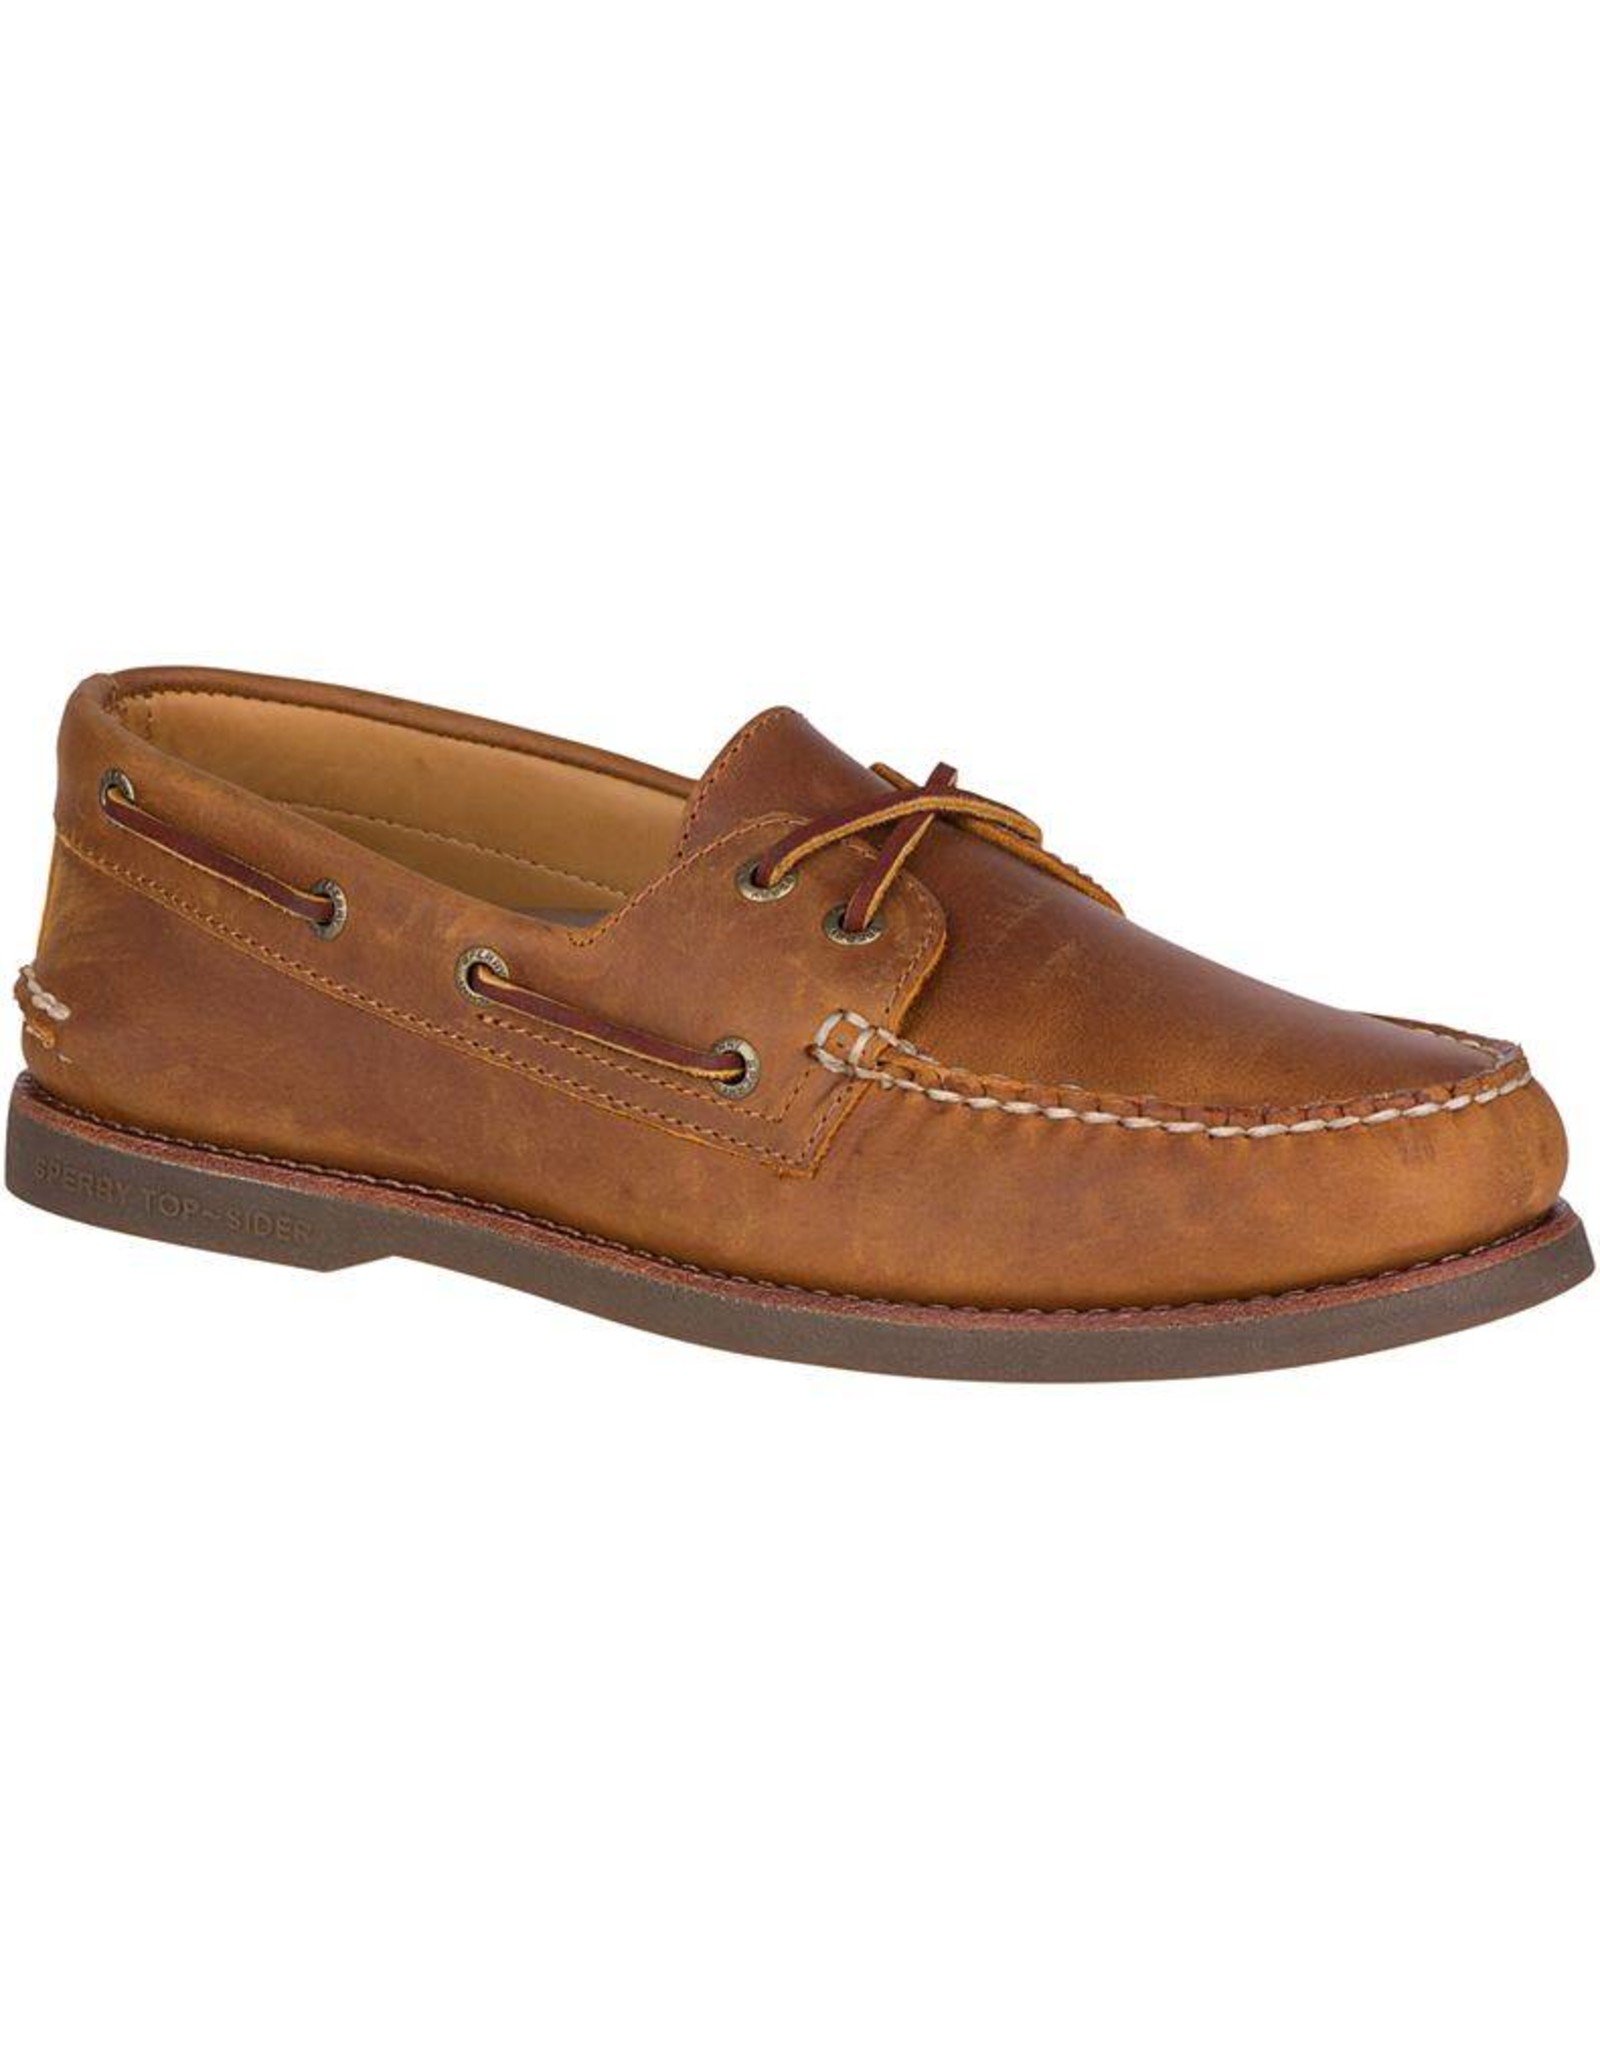 gold cup sperry topsiders